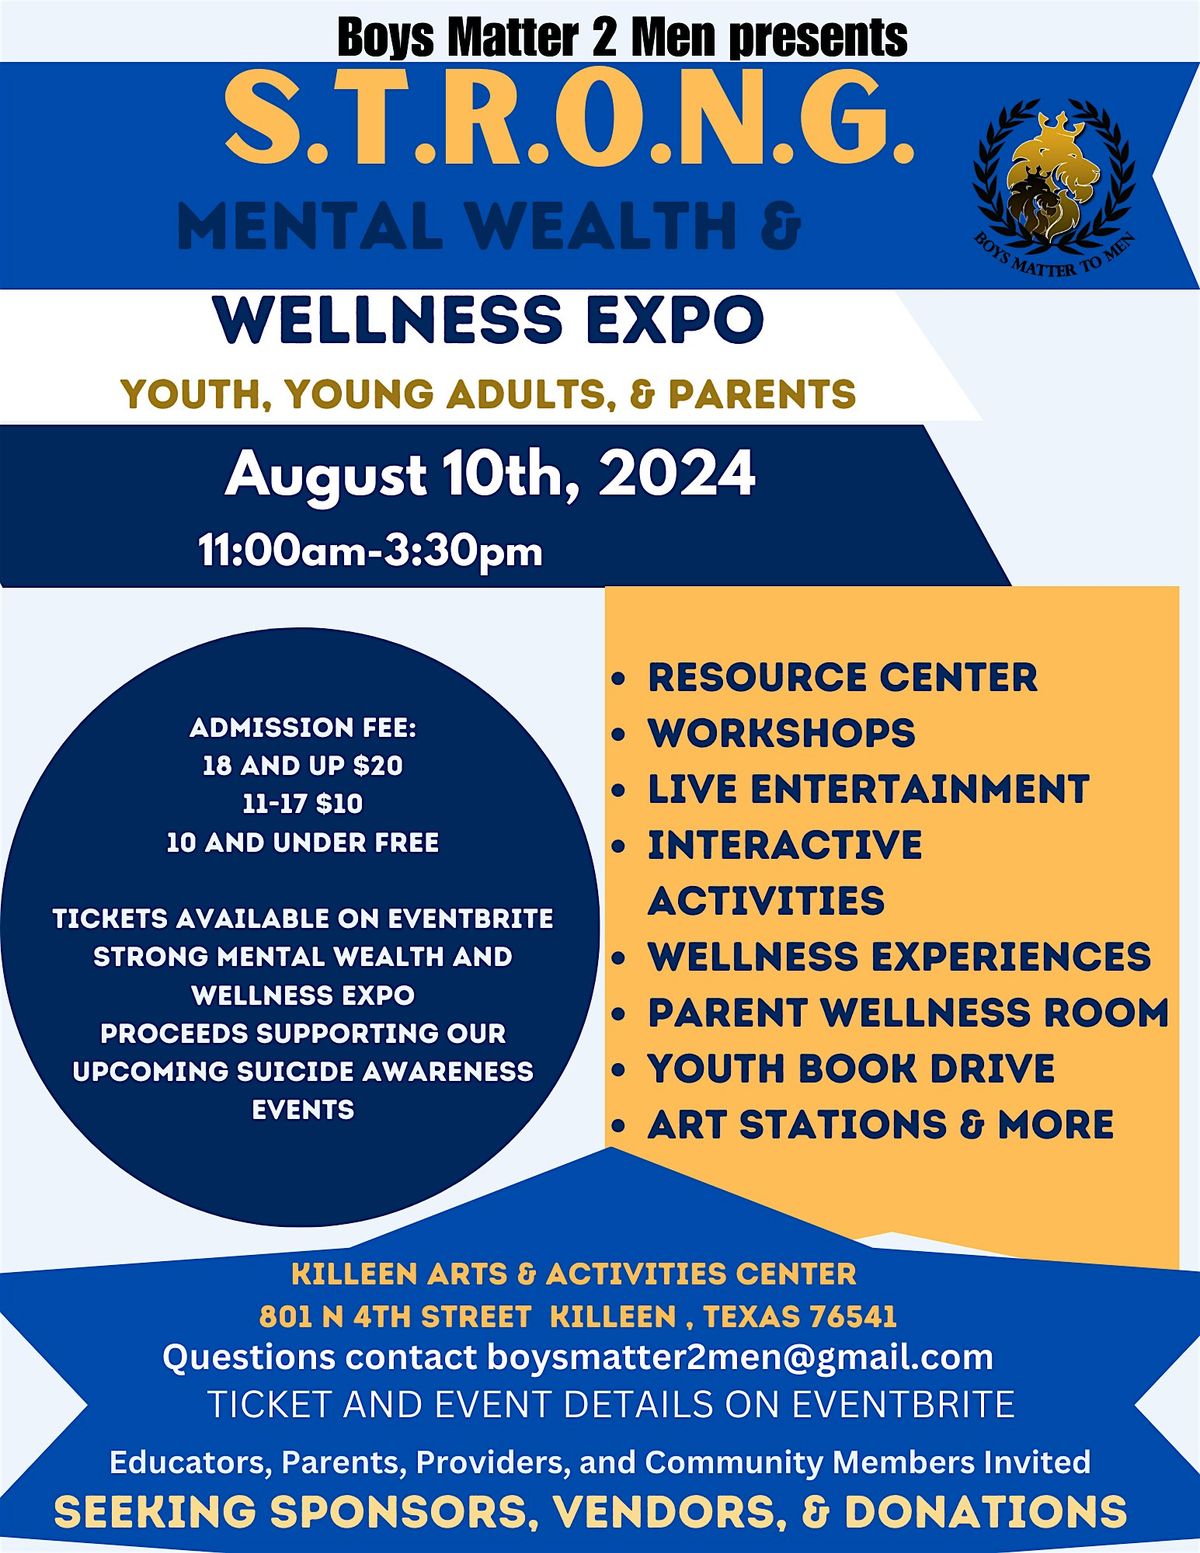 STRONG MENTAL WEALTH AND WELLNESS EXPO EVENT